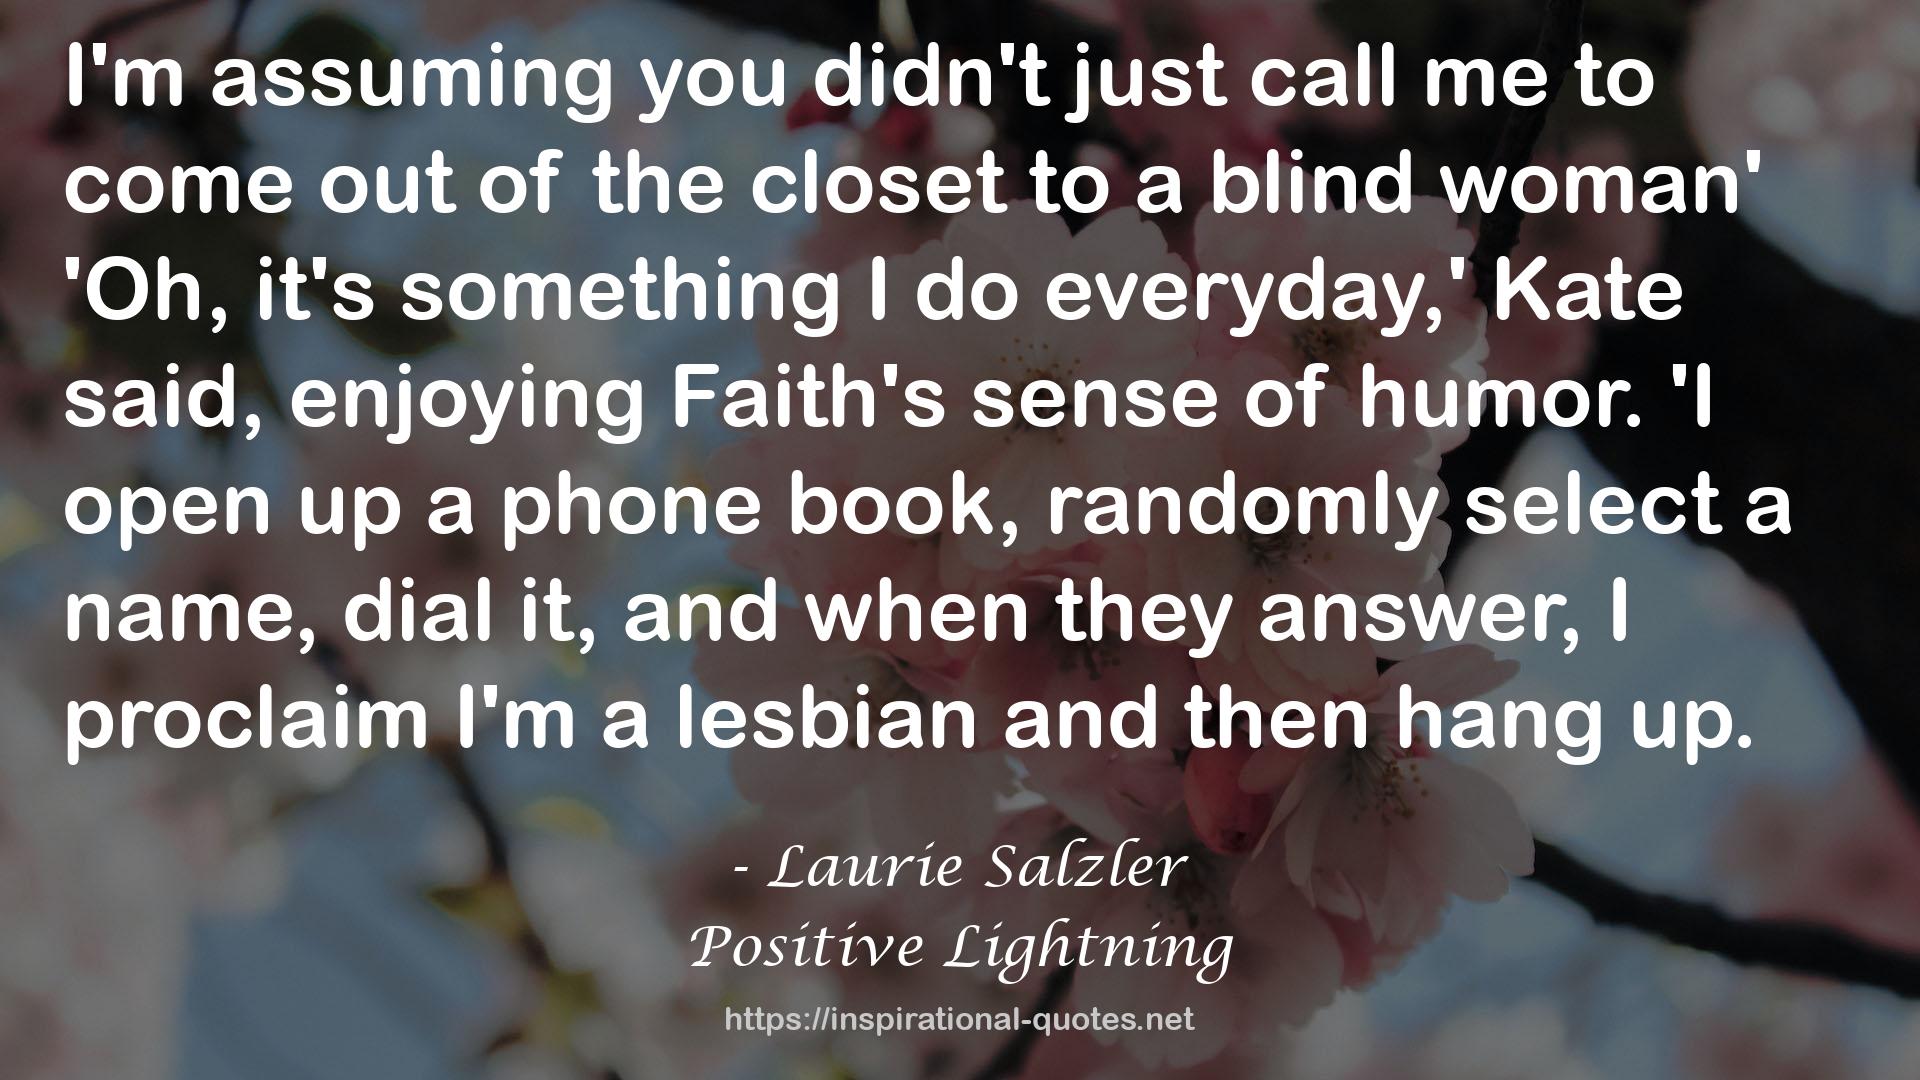 Laurie Salzler QUOTES